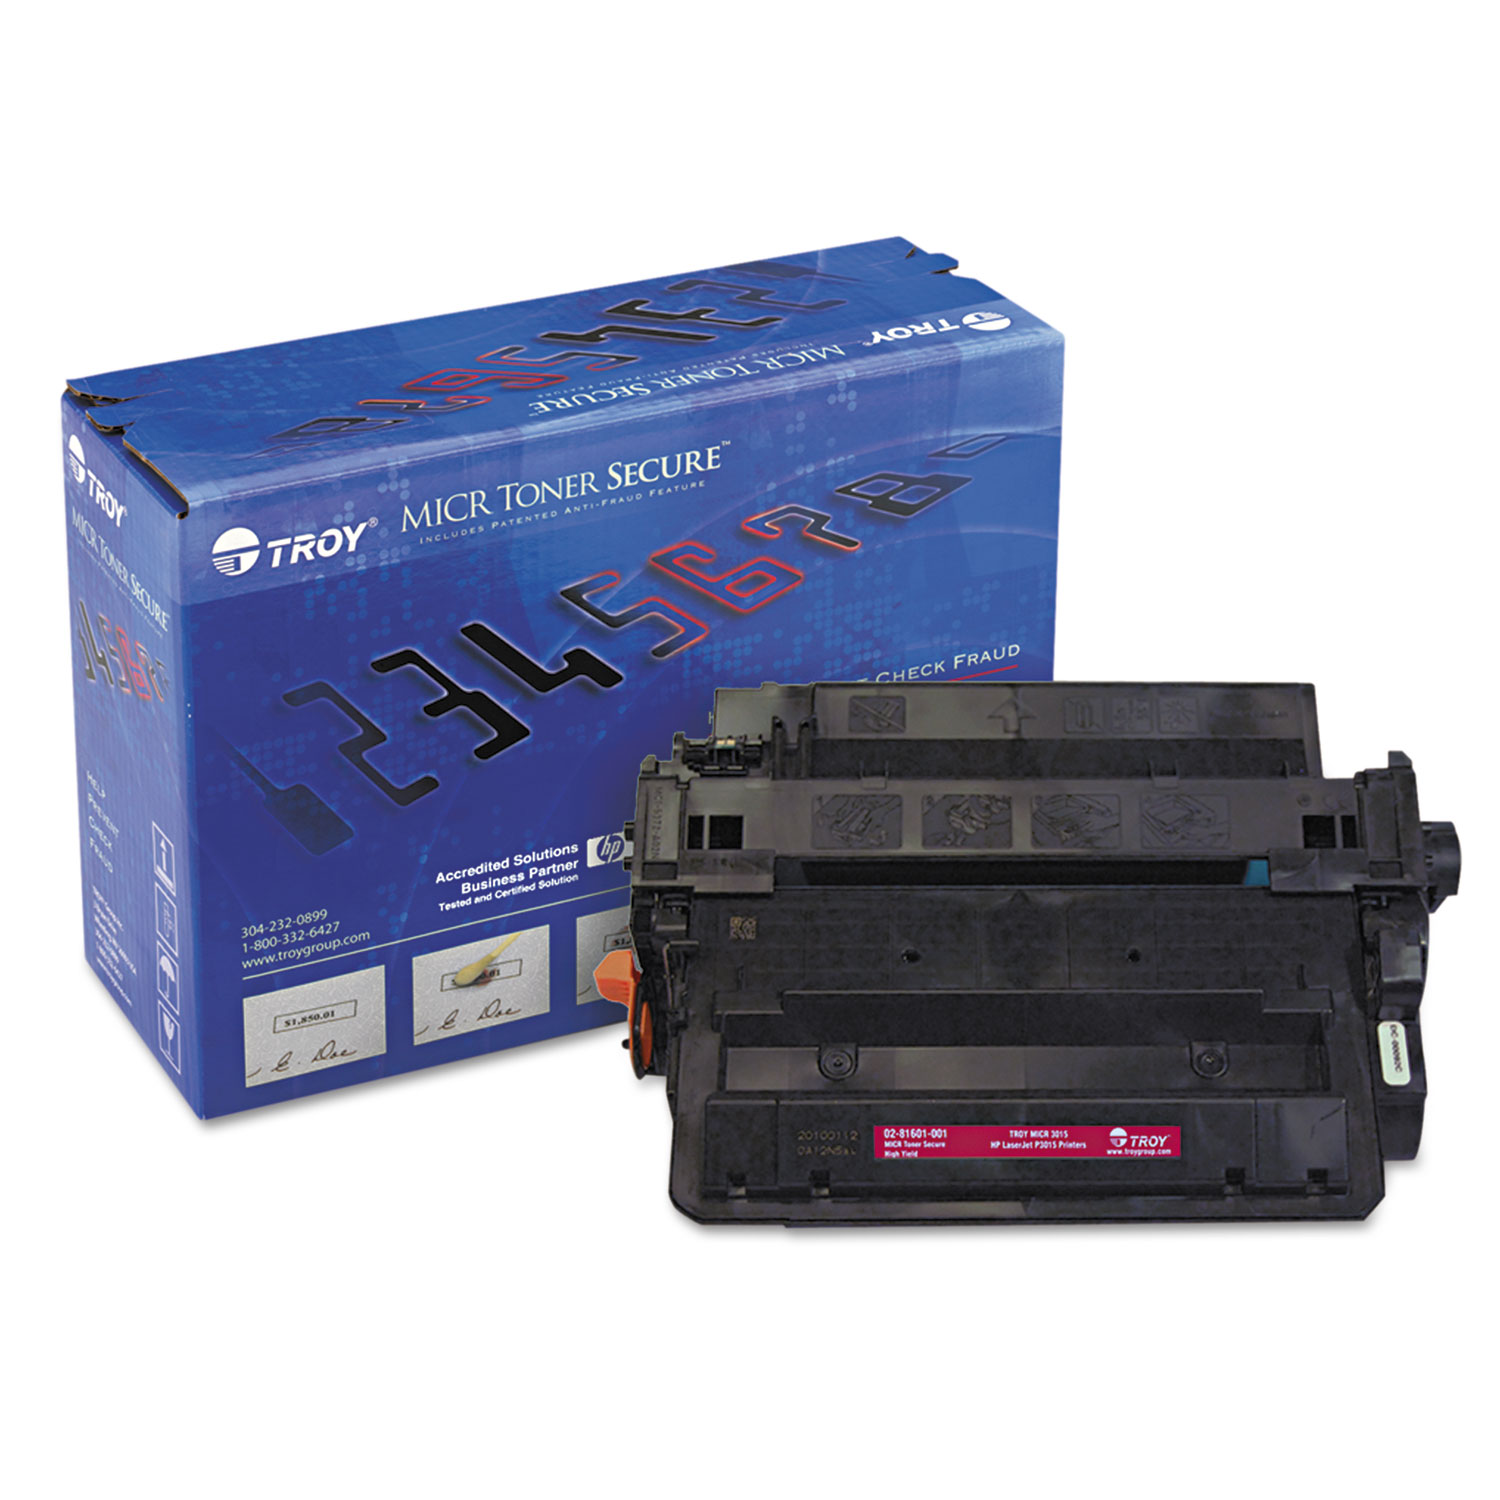 0281601001 55X (HP CE255X) High-Yield MICR Toner Secure, 12500 Page-Yield, Black